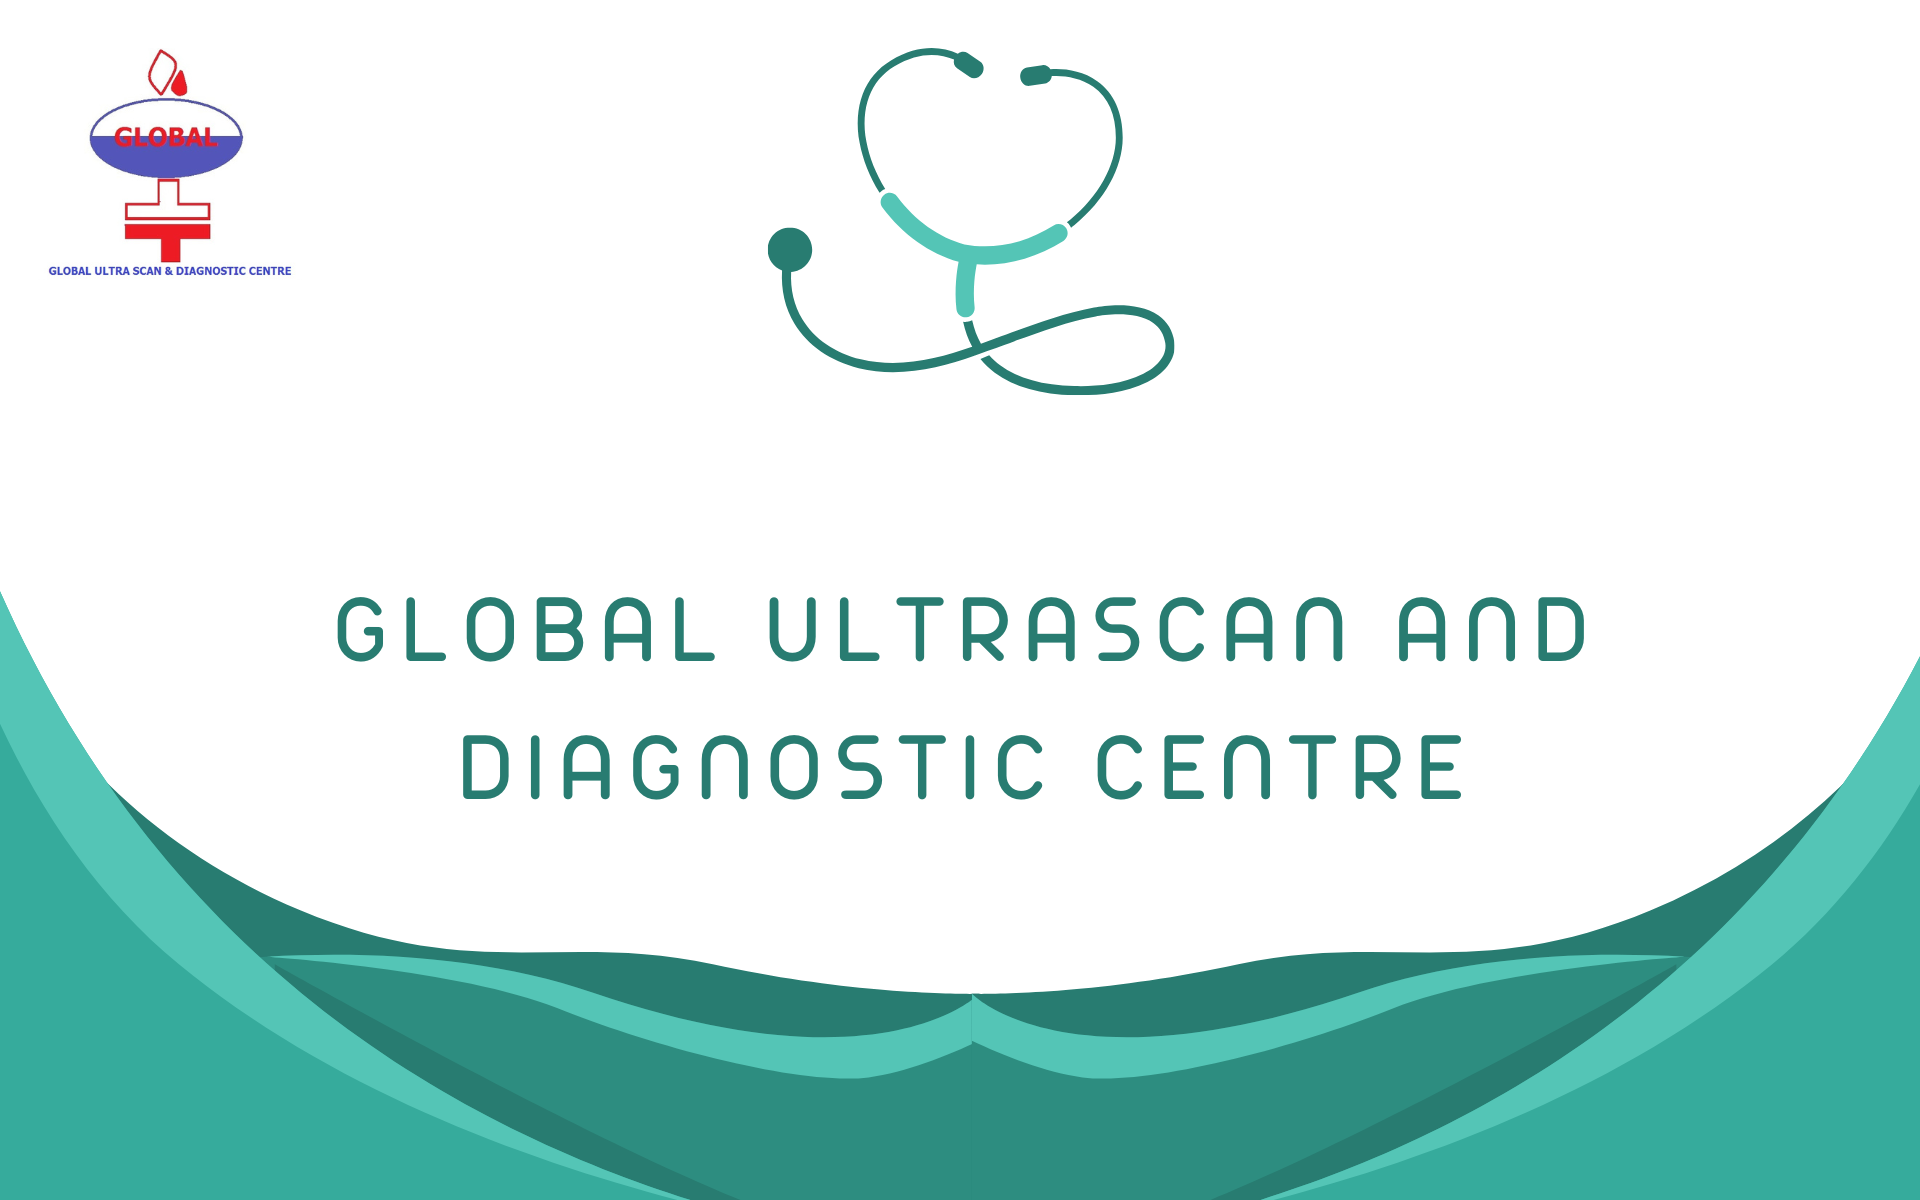 GLOBAL ULTRASCAN AND DIAGNOSTIC CENTRE